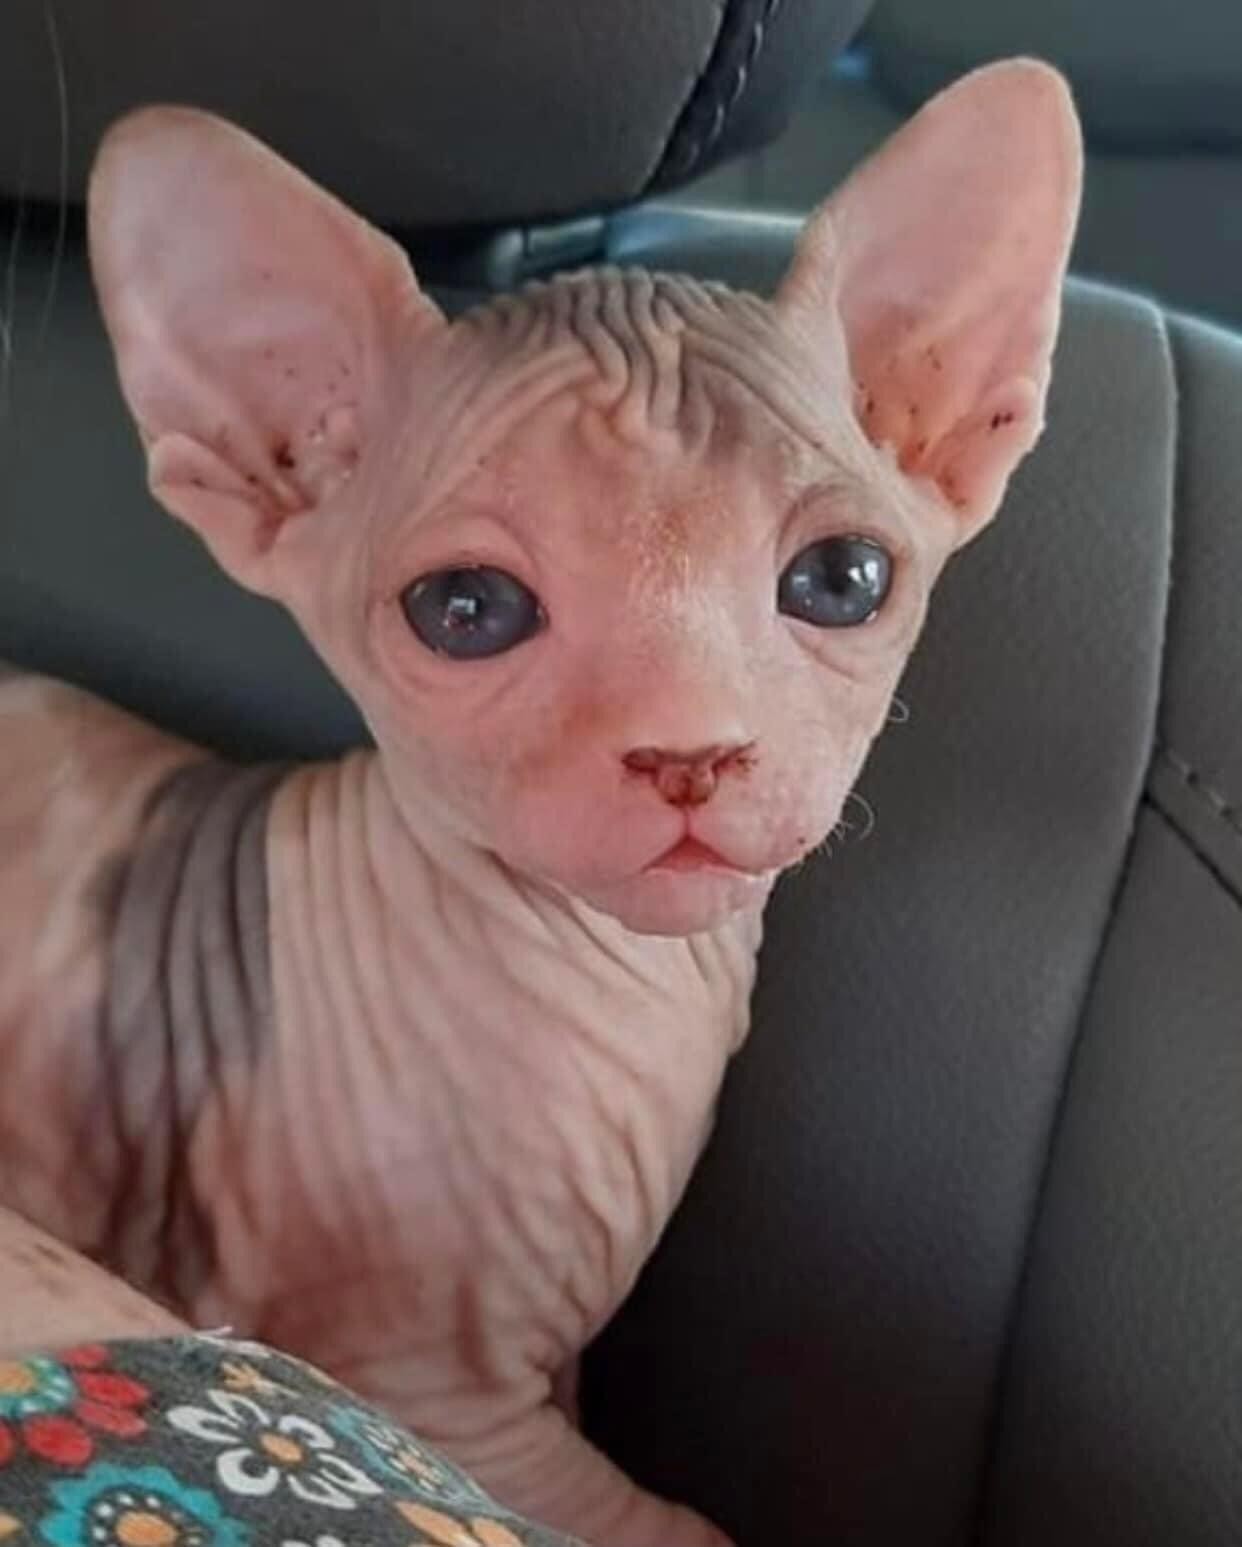 Male and Female Sphynx Kittens